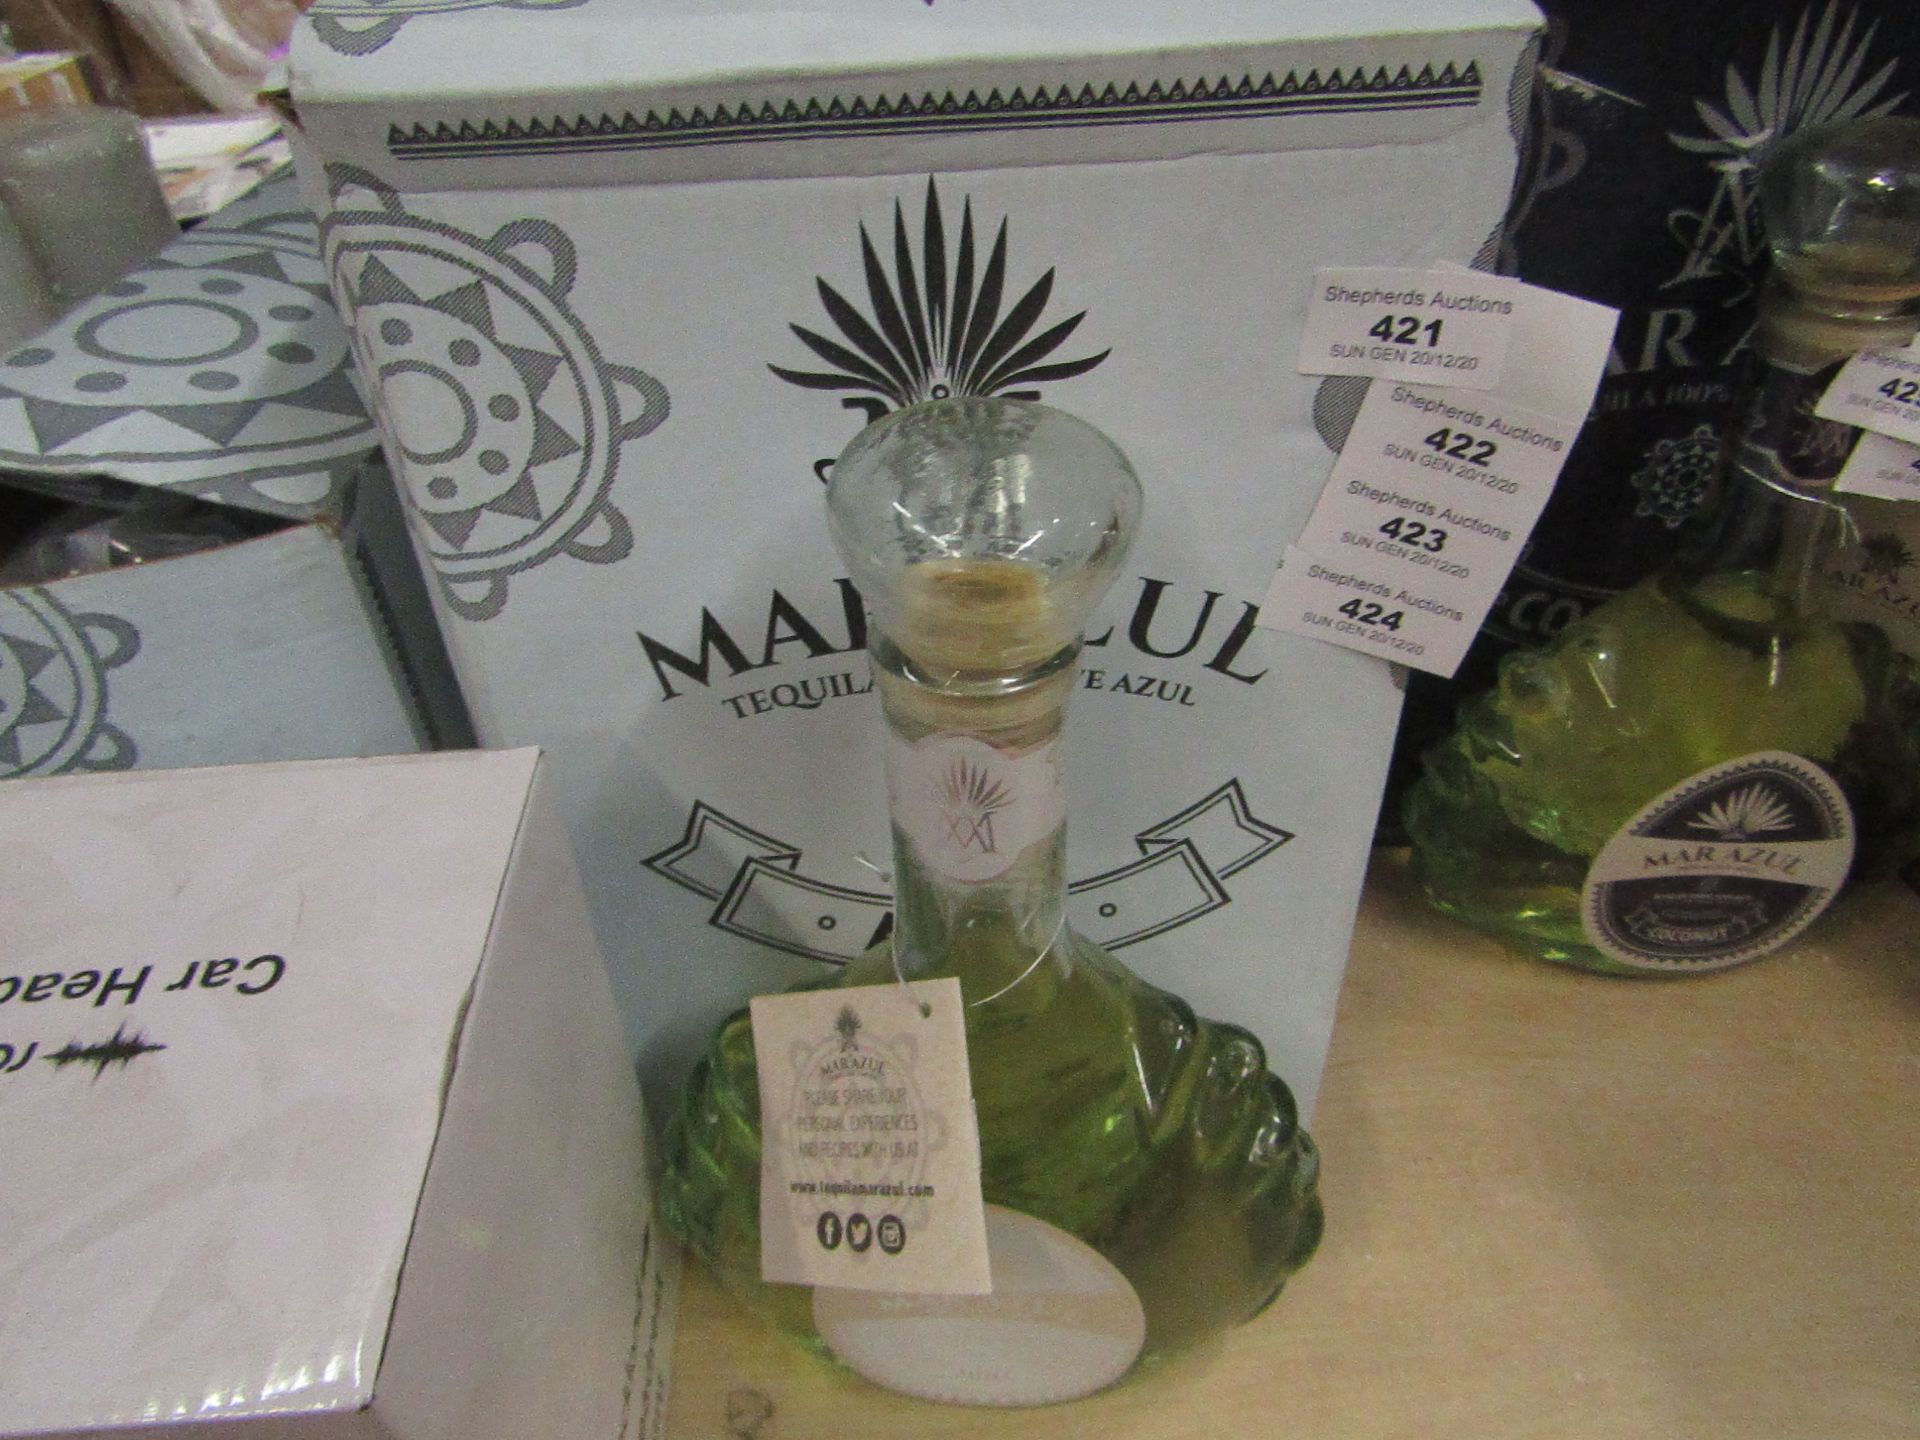 NO VAT!! 1 X 700ml Bottle of Mar Azul Mint flavoured Tequila, 25% ABV (50% proof), new and sealed,